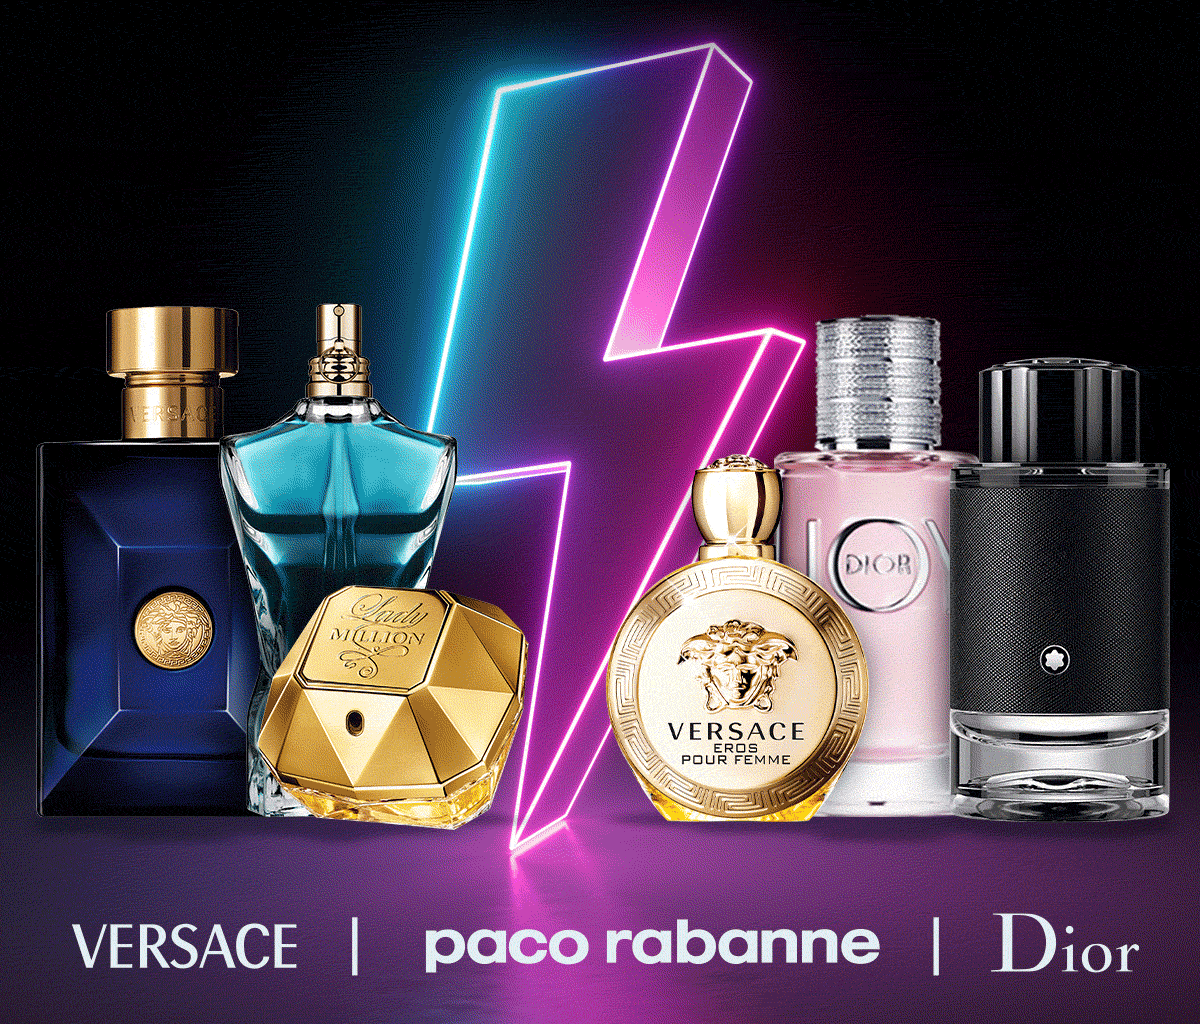 Neon Flashing Light and Fragrance Deals During Overnight Sale